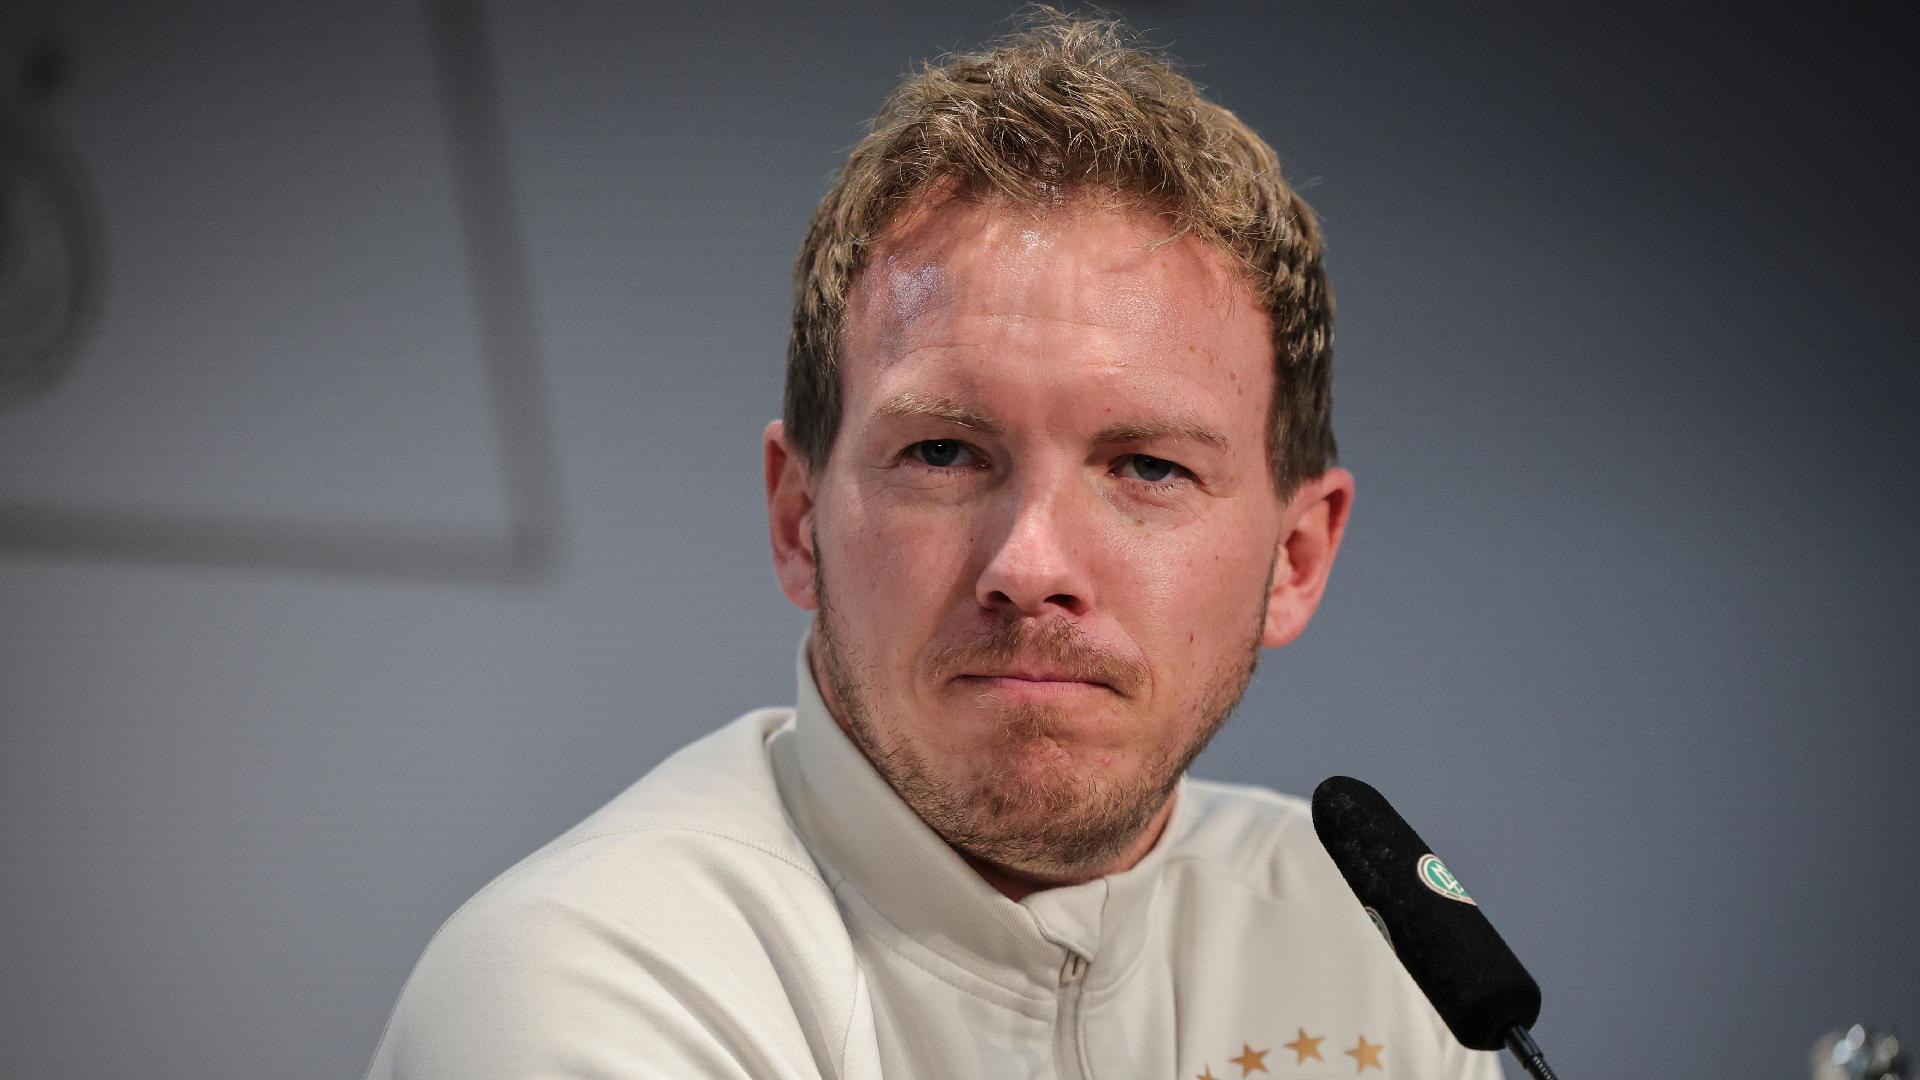 Germany coach Julian Nagelsmann speaks during a press conference (Christian Charisius/AP)